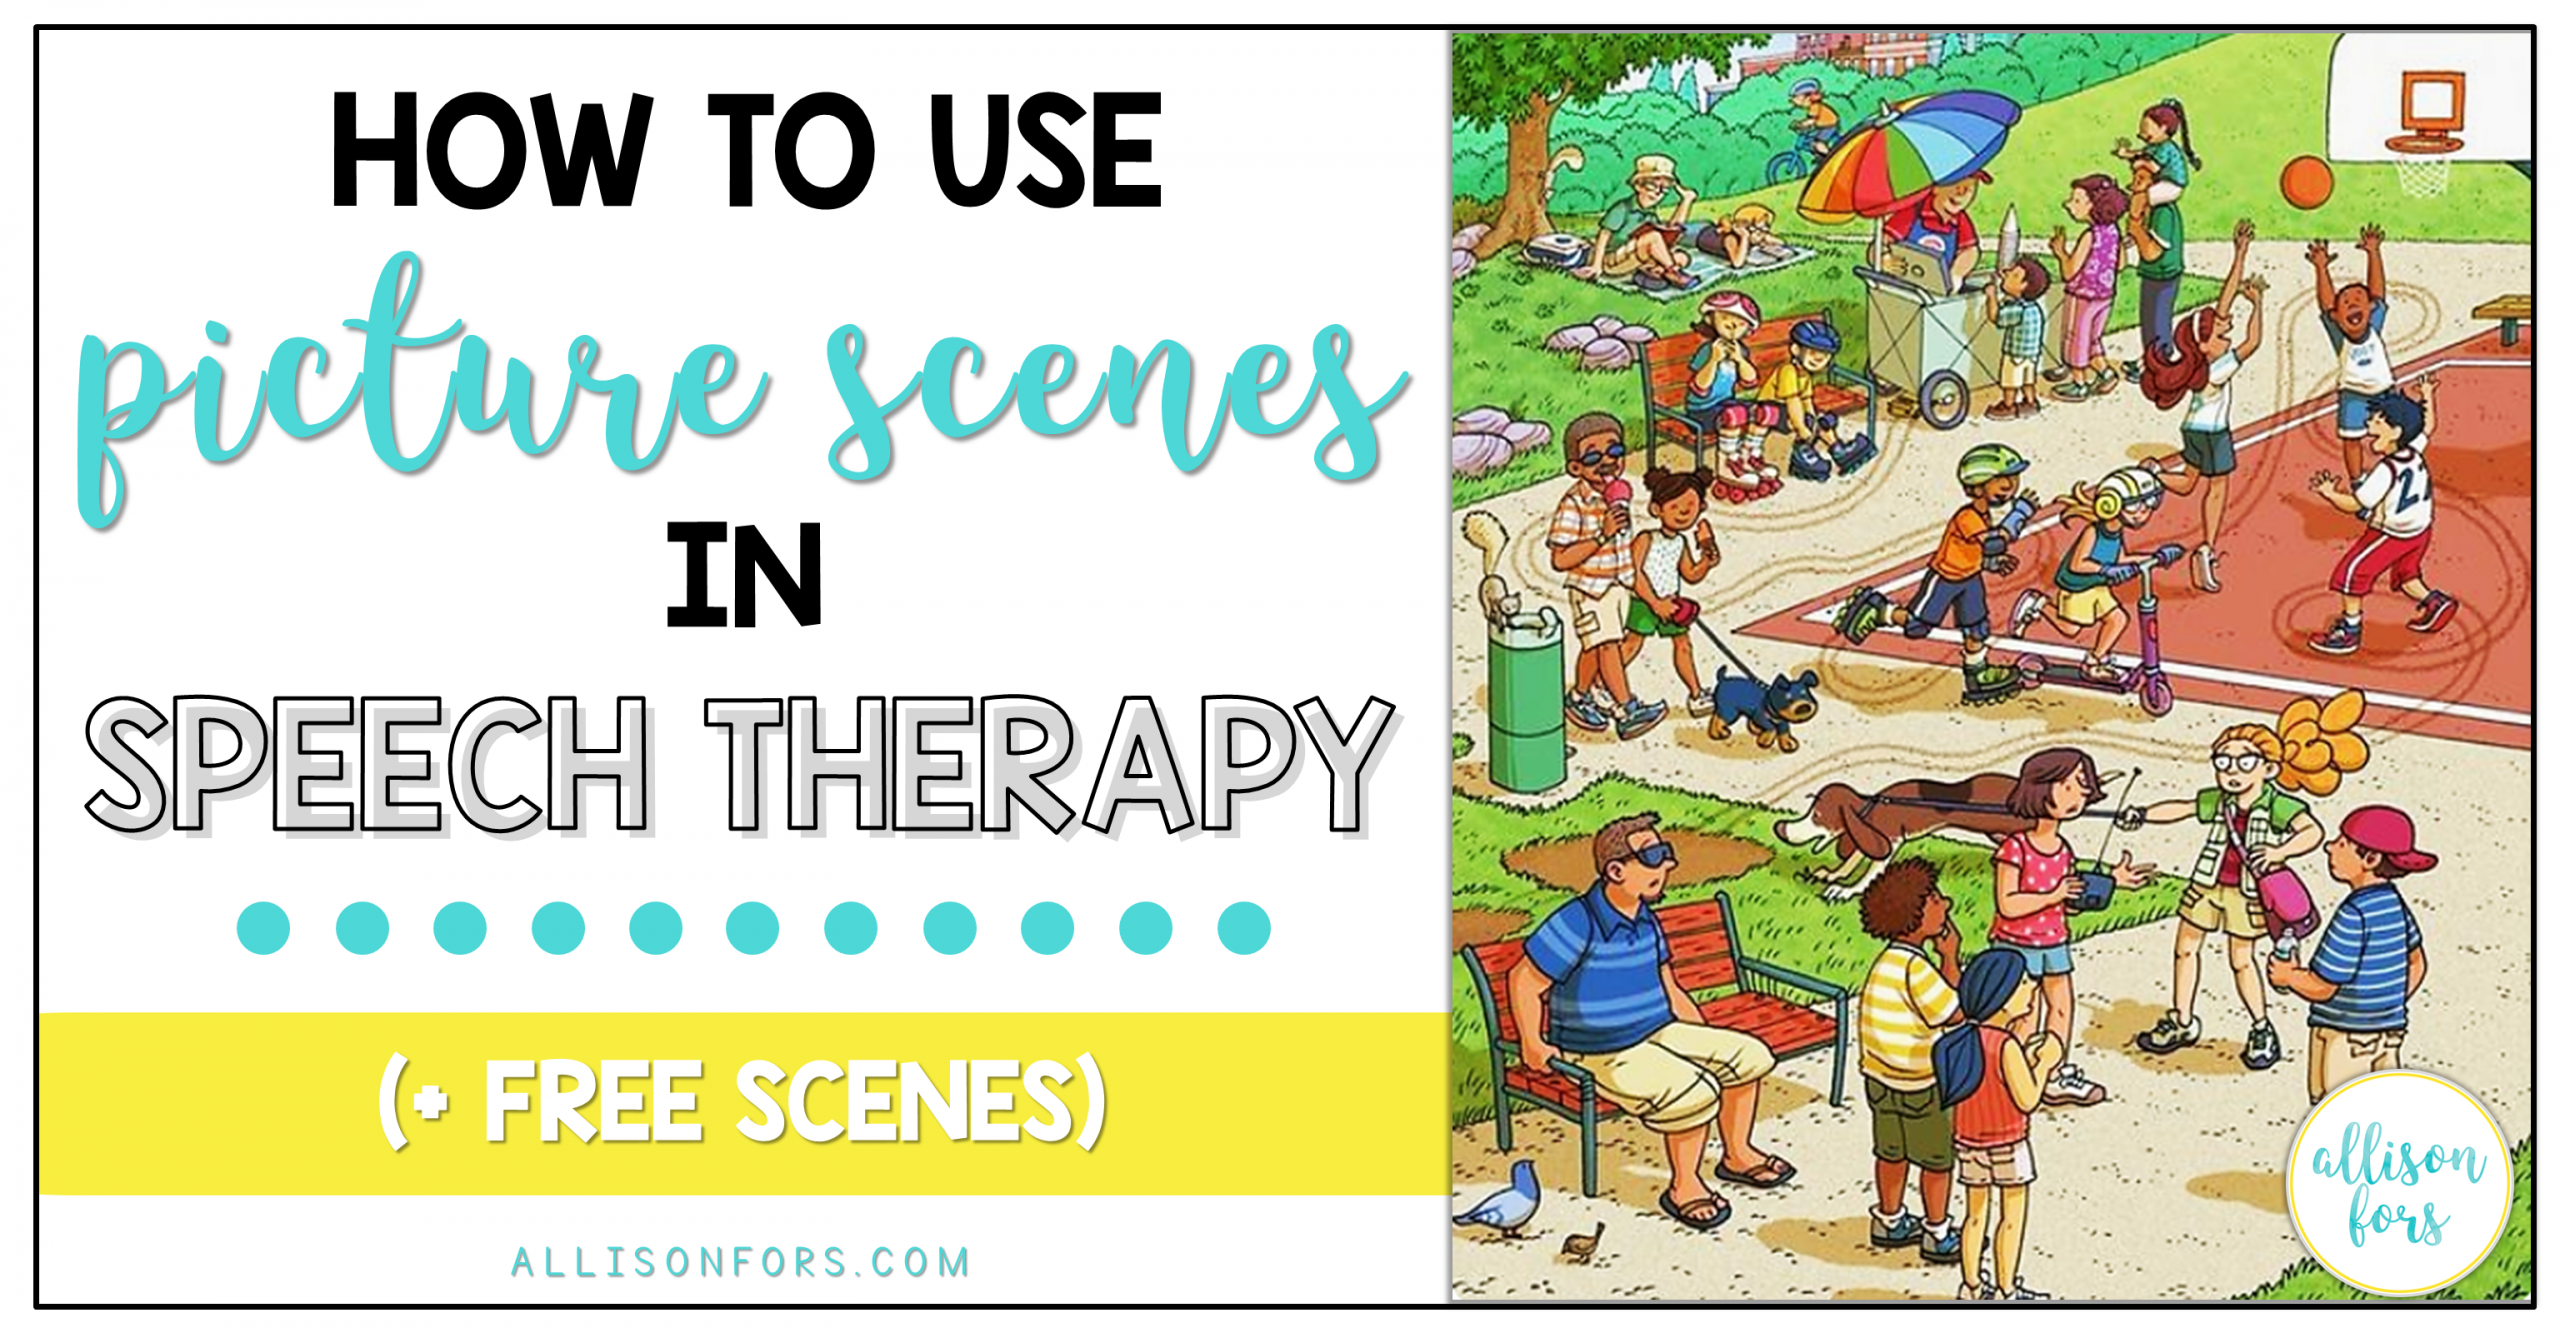 How to Use Picture Scenes in Speech Therapy (+ free scenes!)